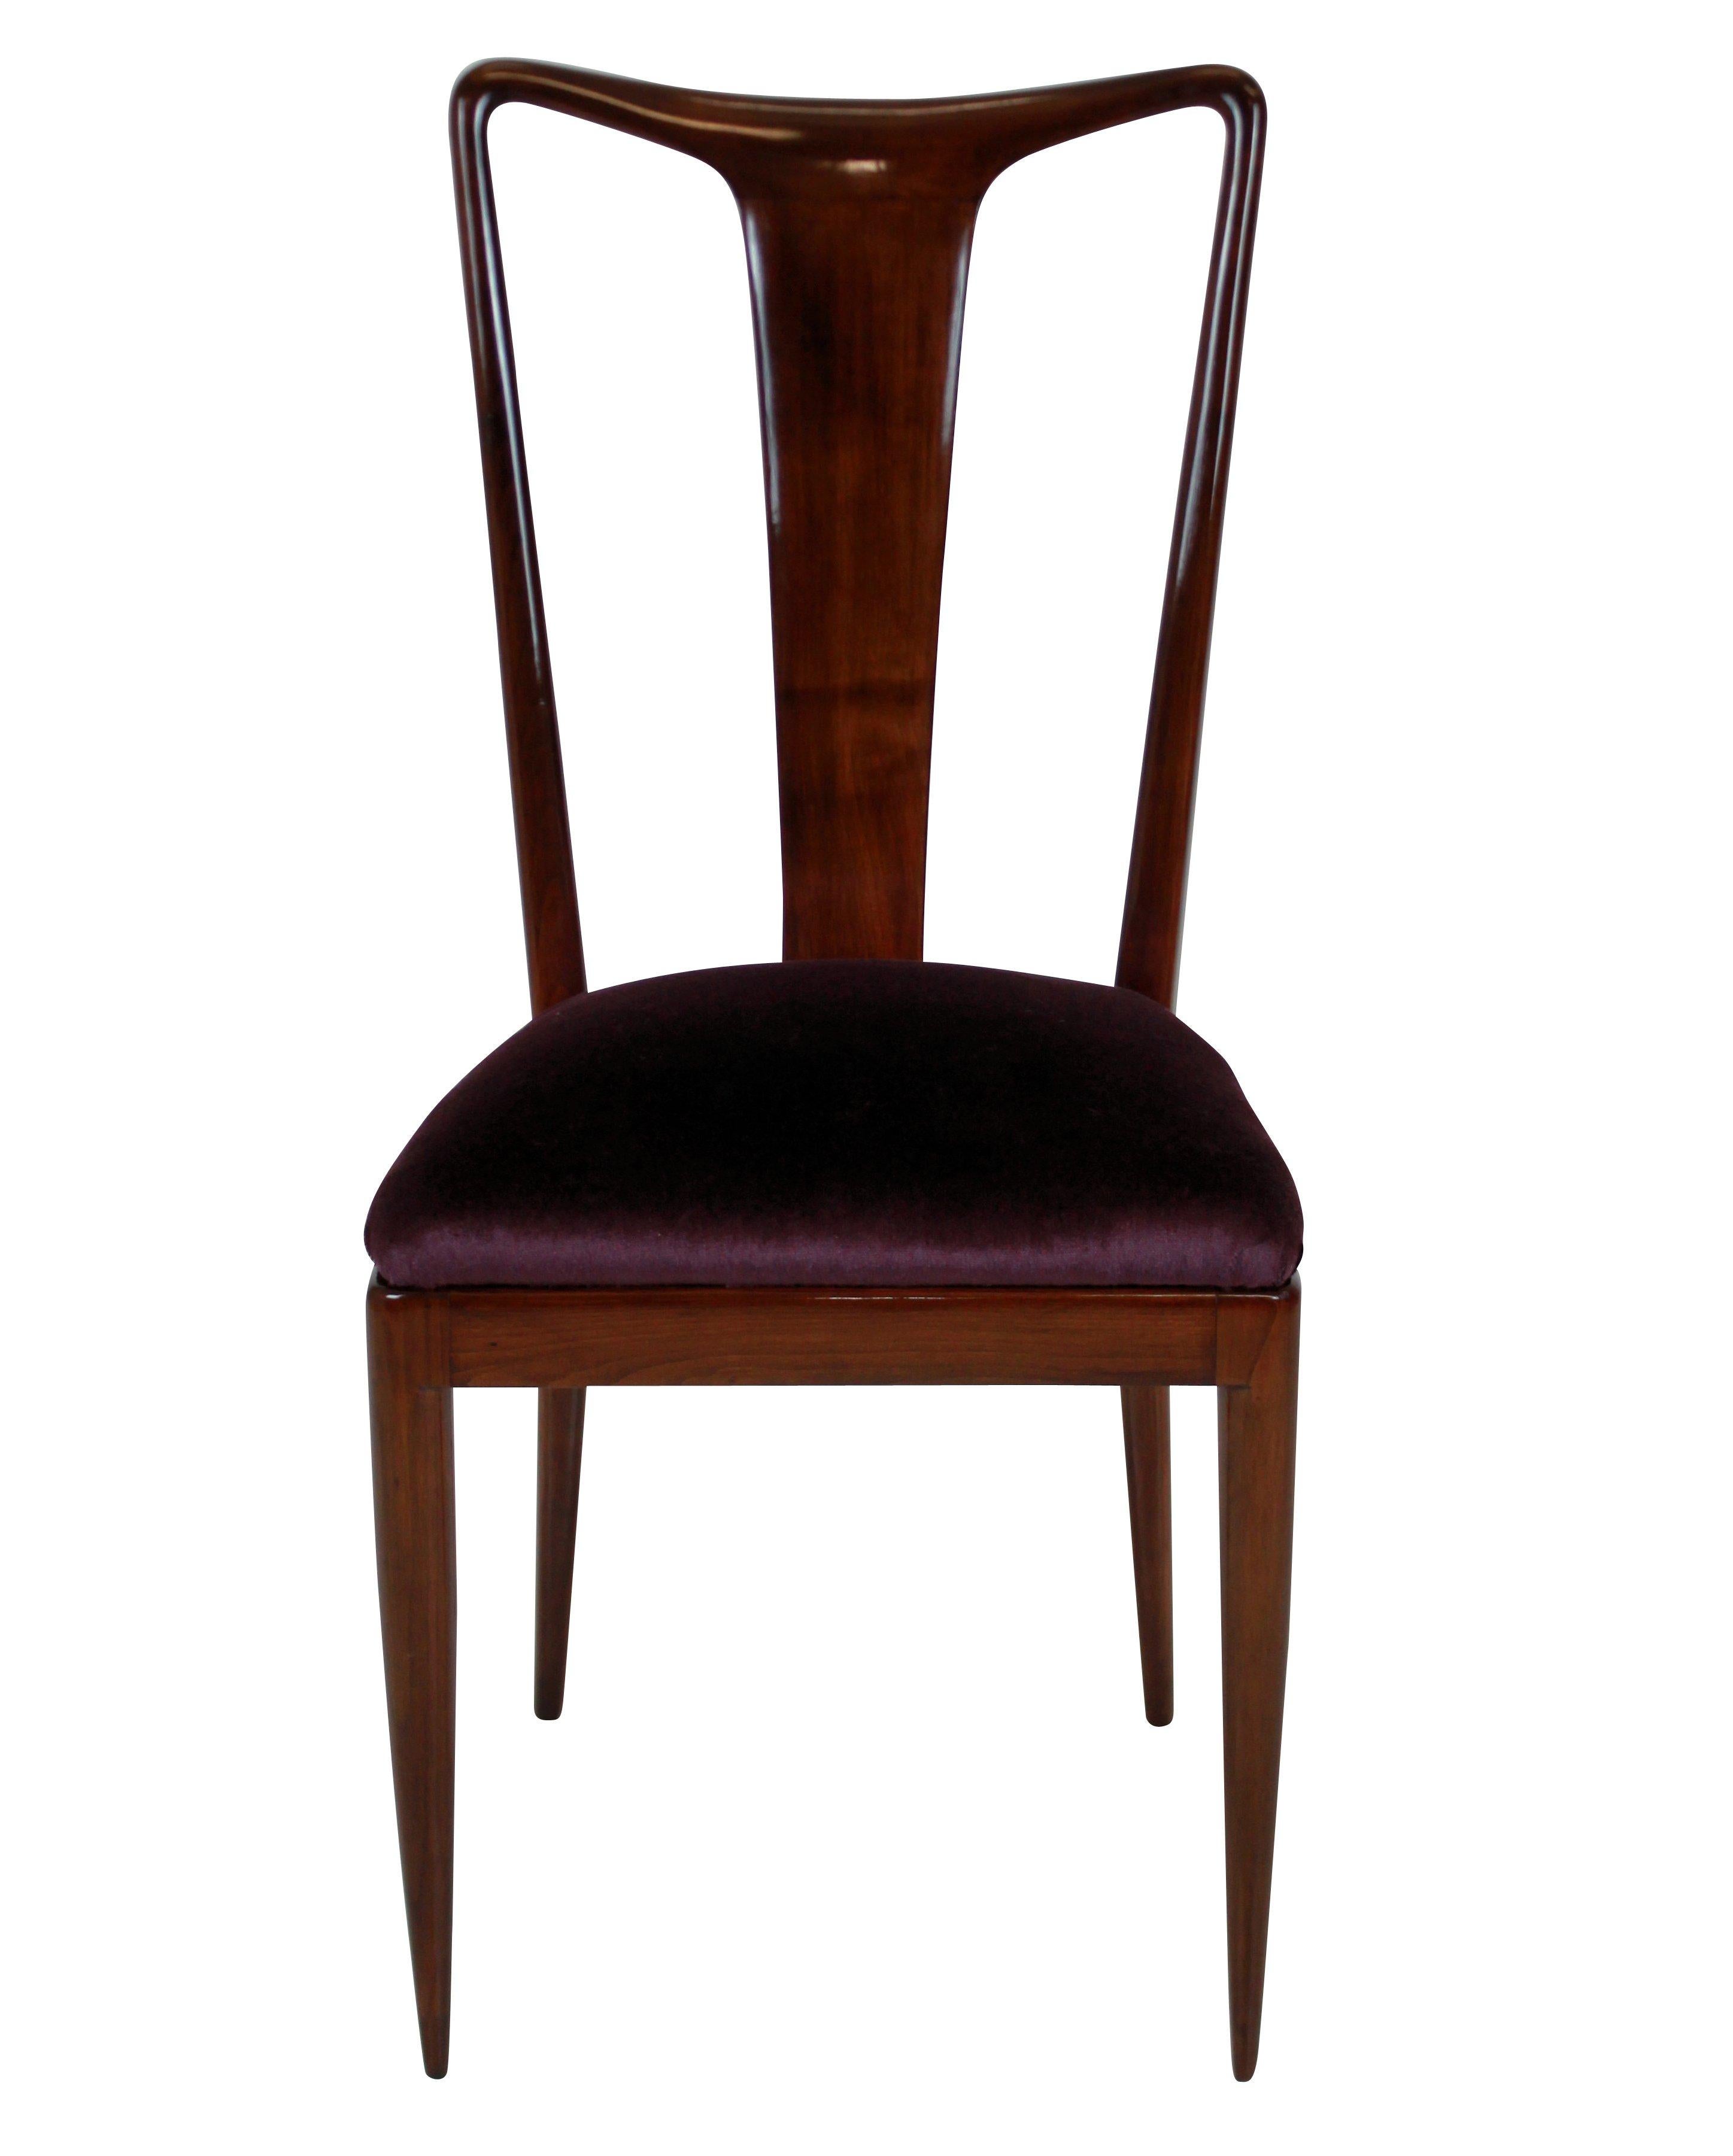 Italian Set of Fine Dining Chairs in the Style of Guglielmo Ulrich